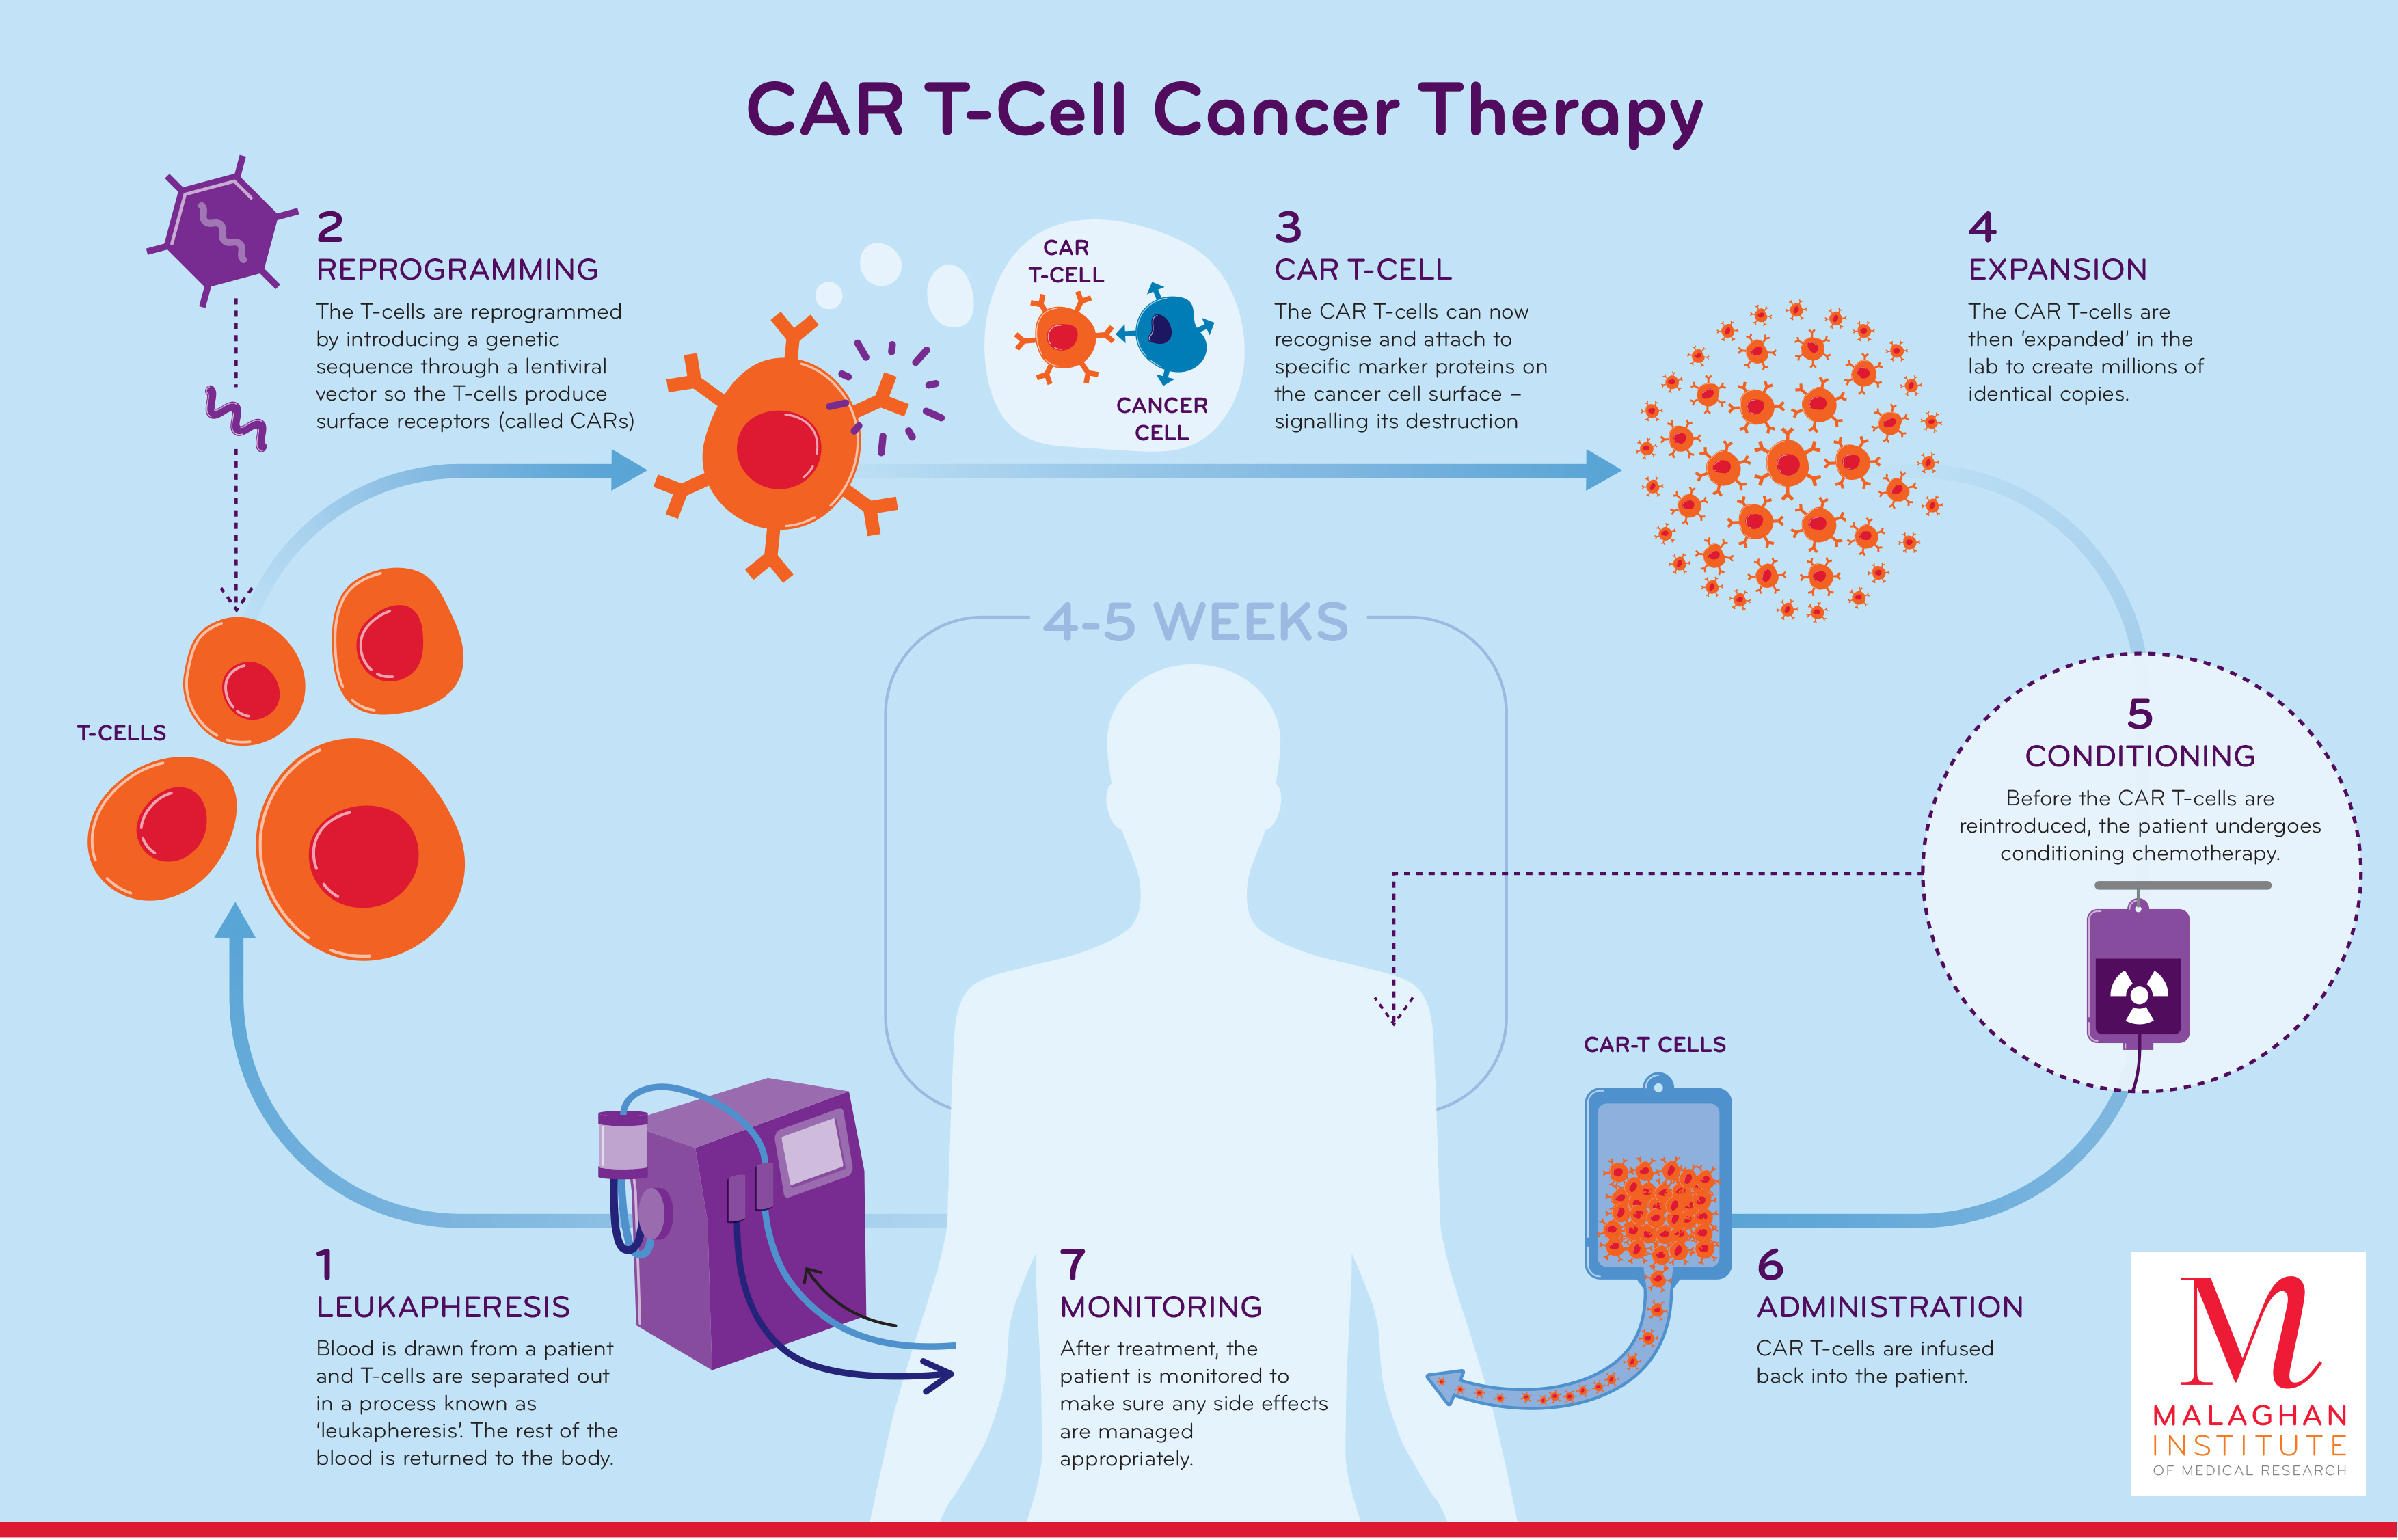 CAR T-cell therapy